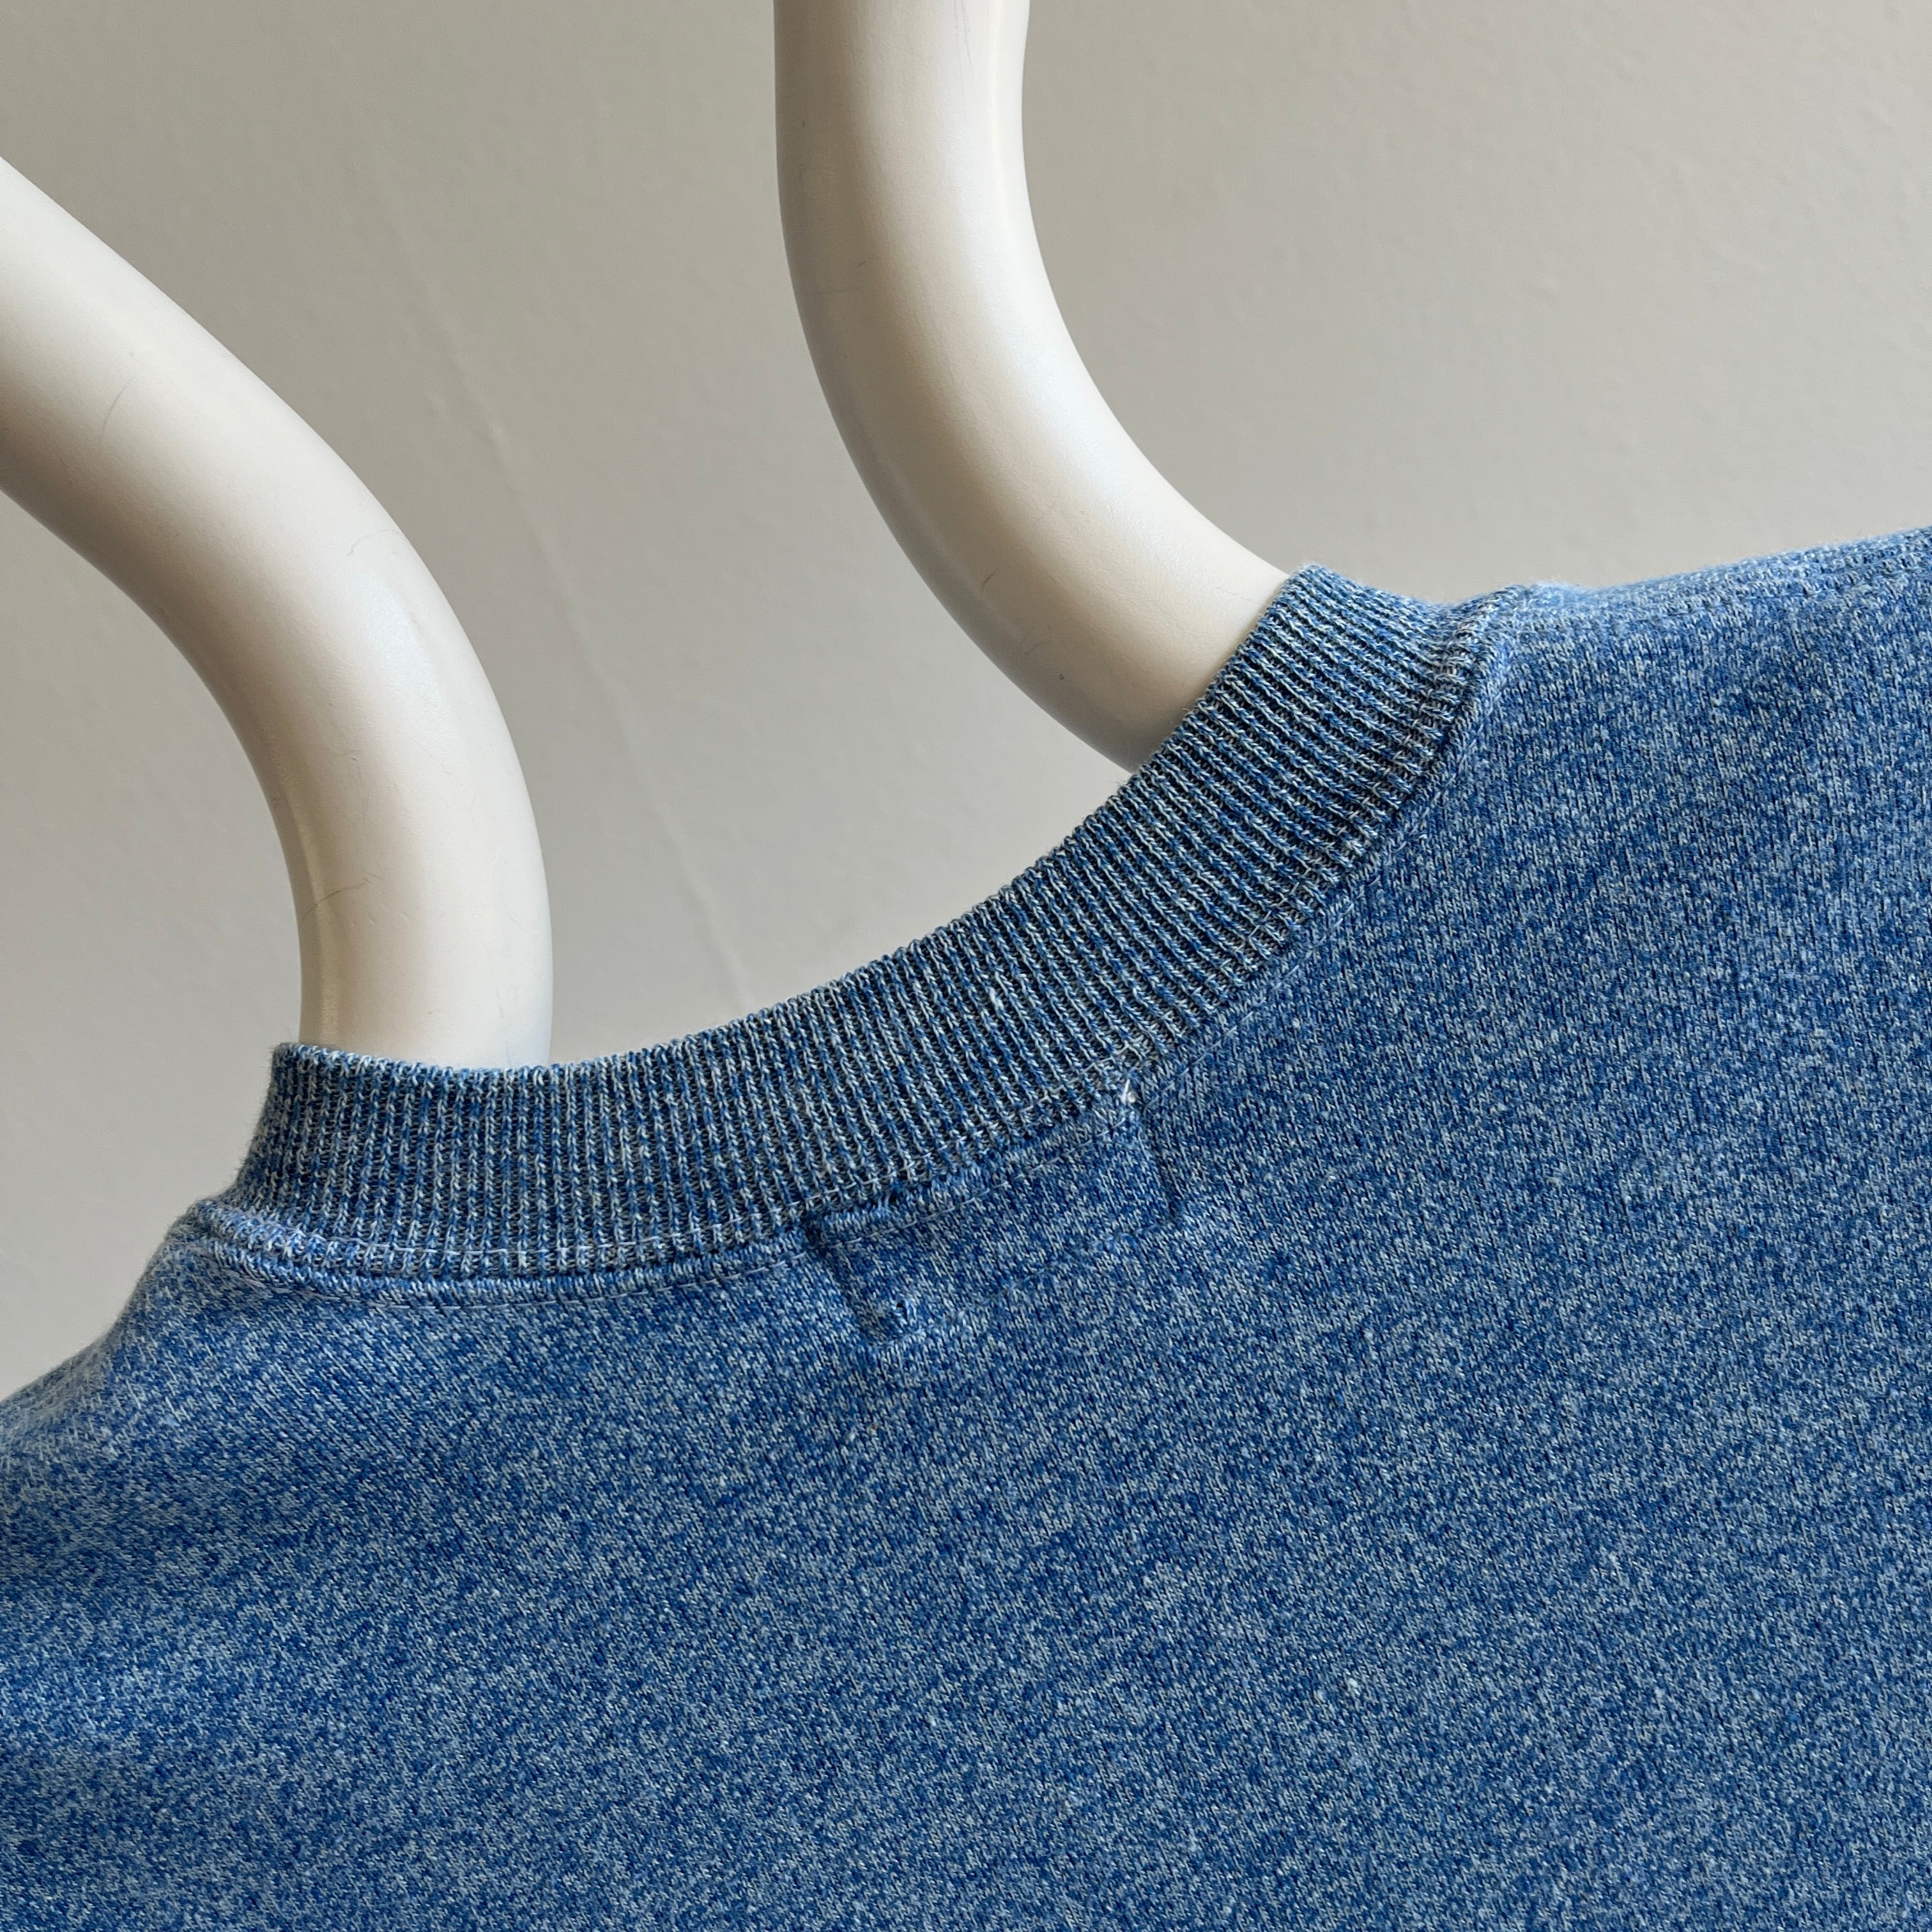 1960/70s Thick Knit Stretchy Blank Heather Blue T-Shirt (Check out the Tag!!)